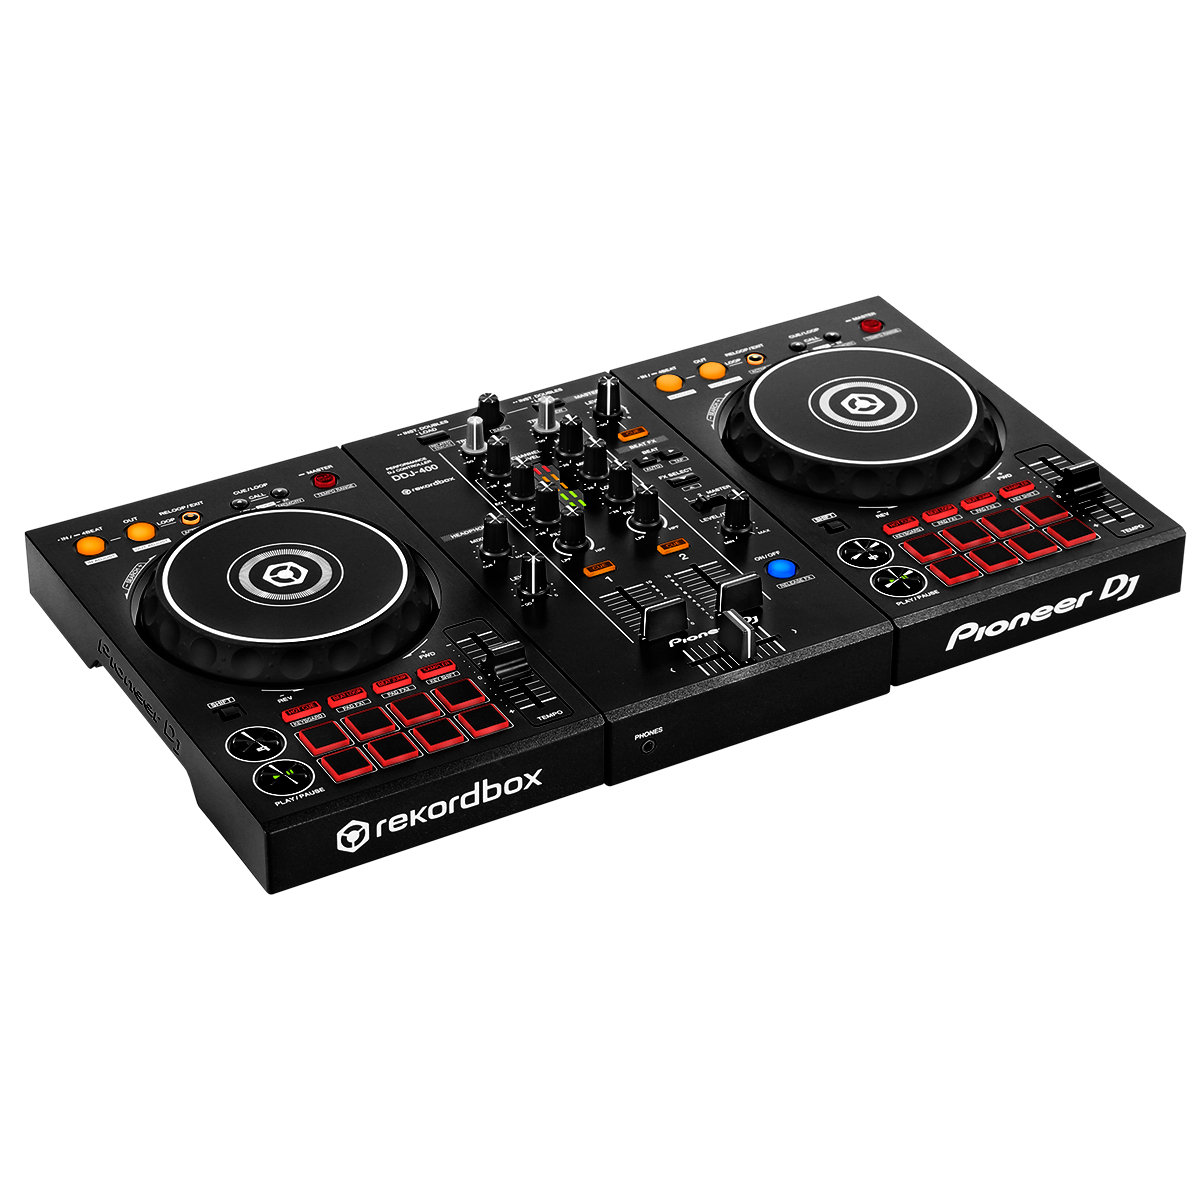 Pioneer DDJ-400 Controller at Rs 24900/piece, Sound Controller in Chennai